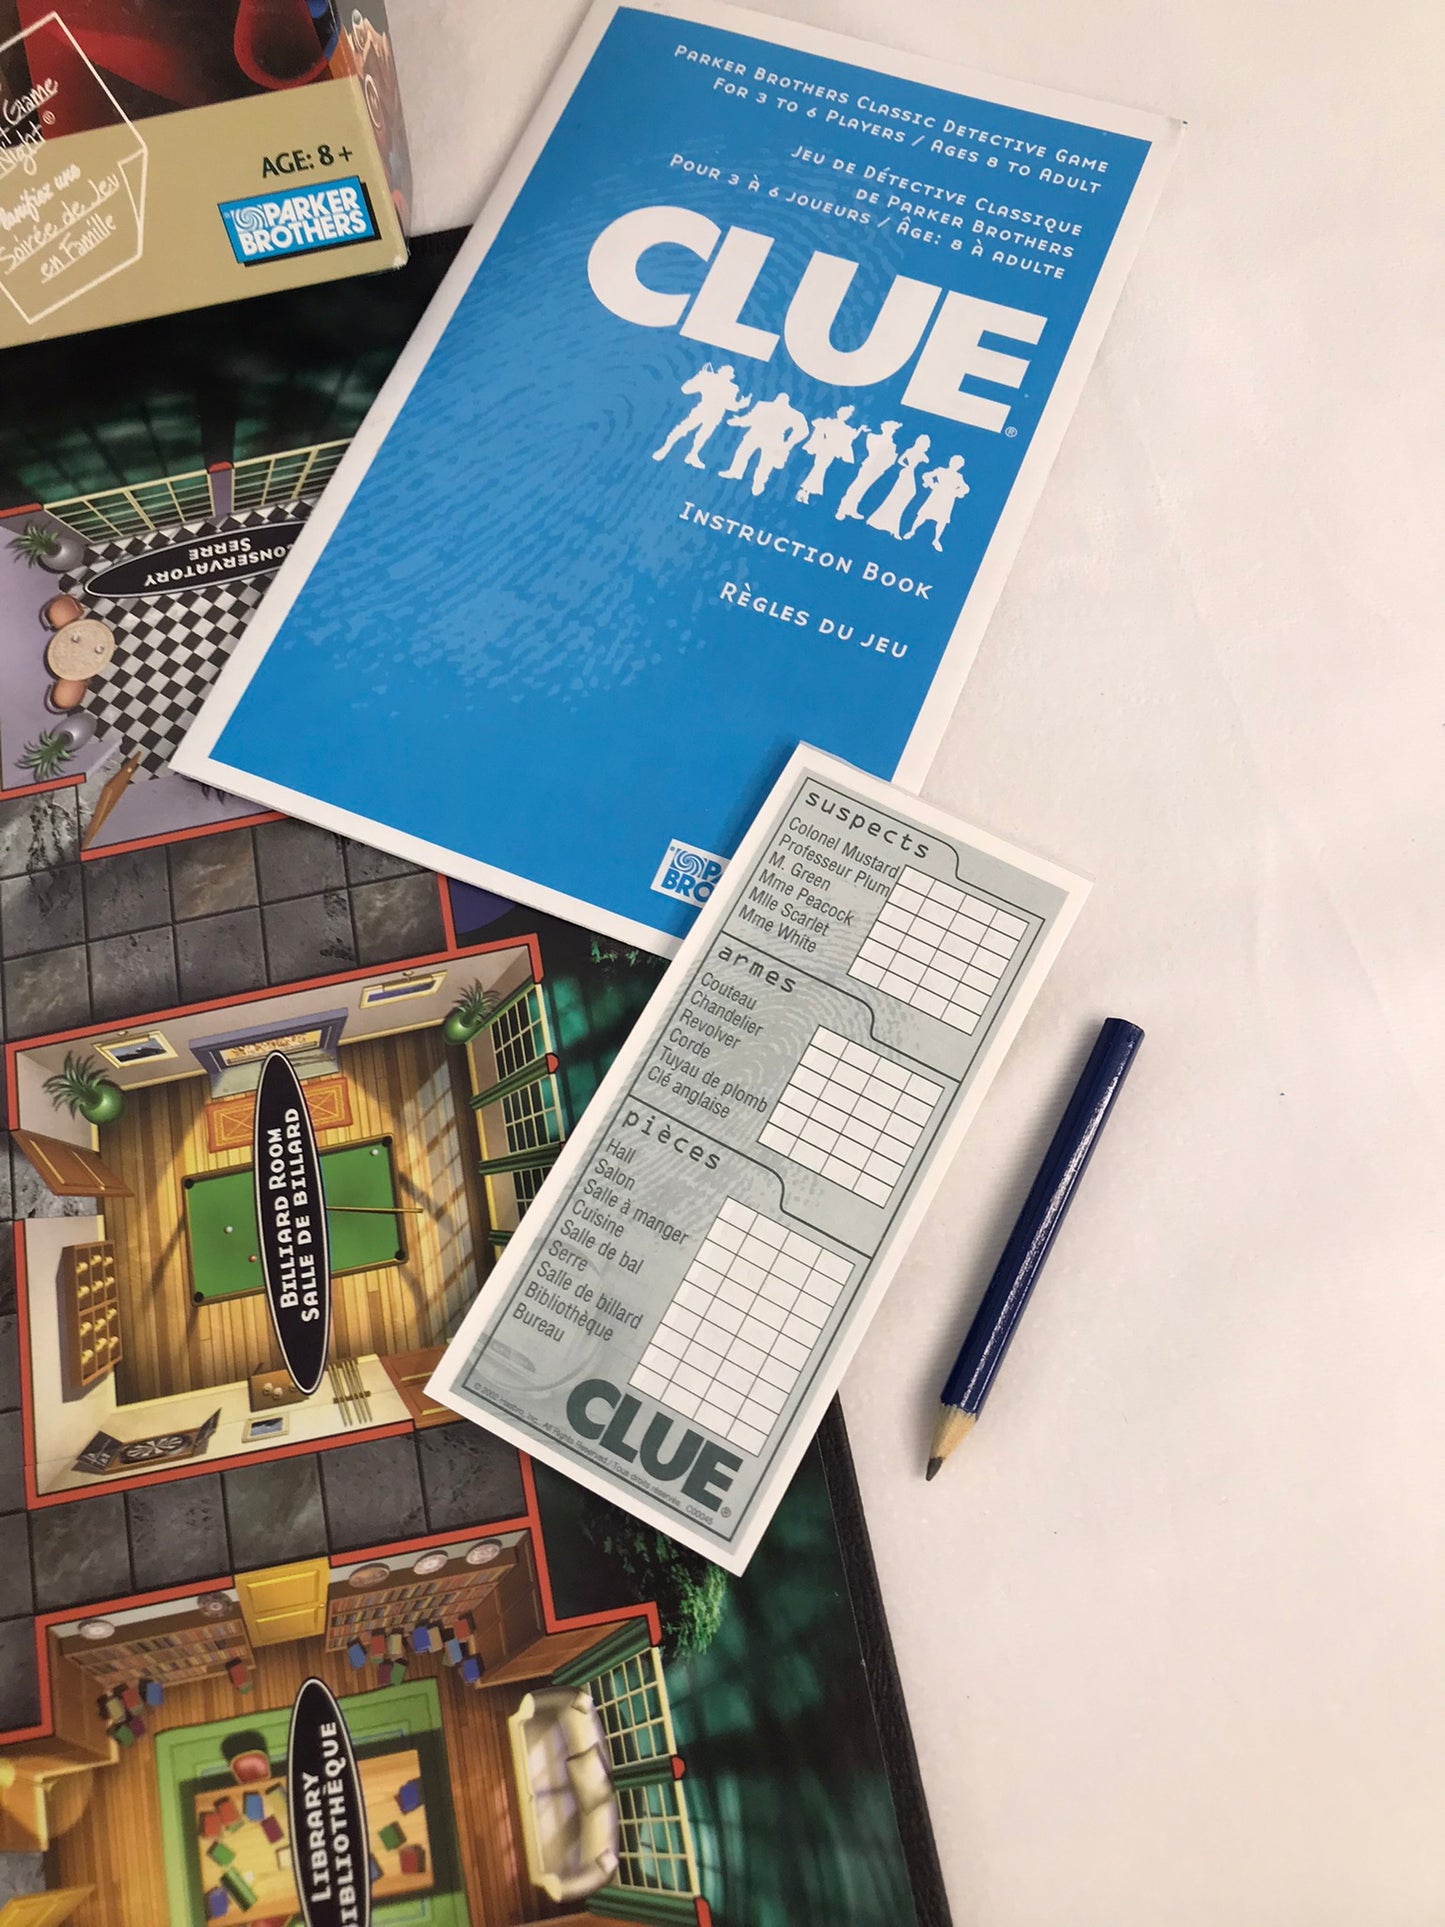 Game Parker Brothers Classic Detective Game Clue As New Complete